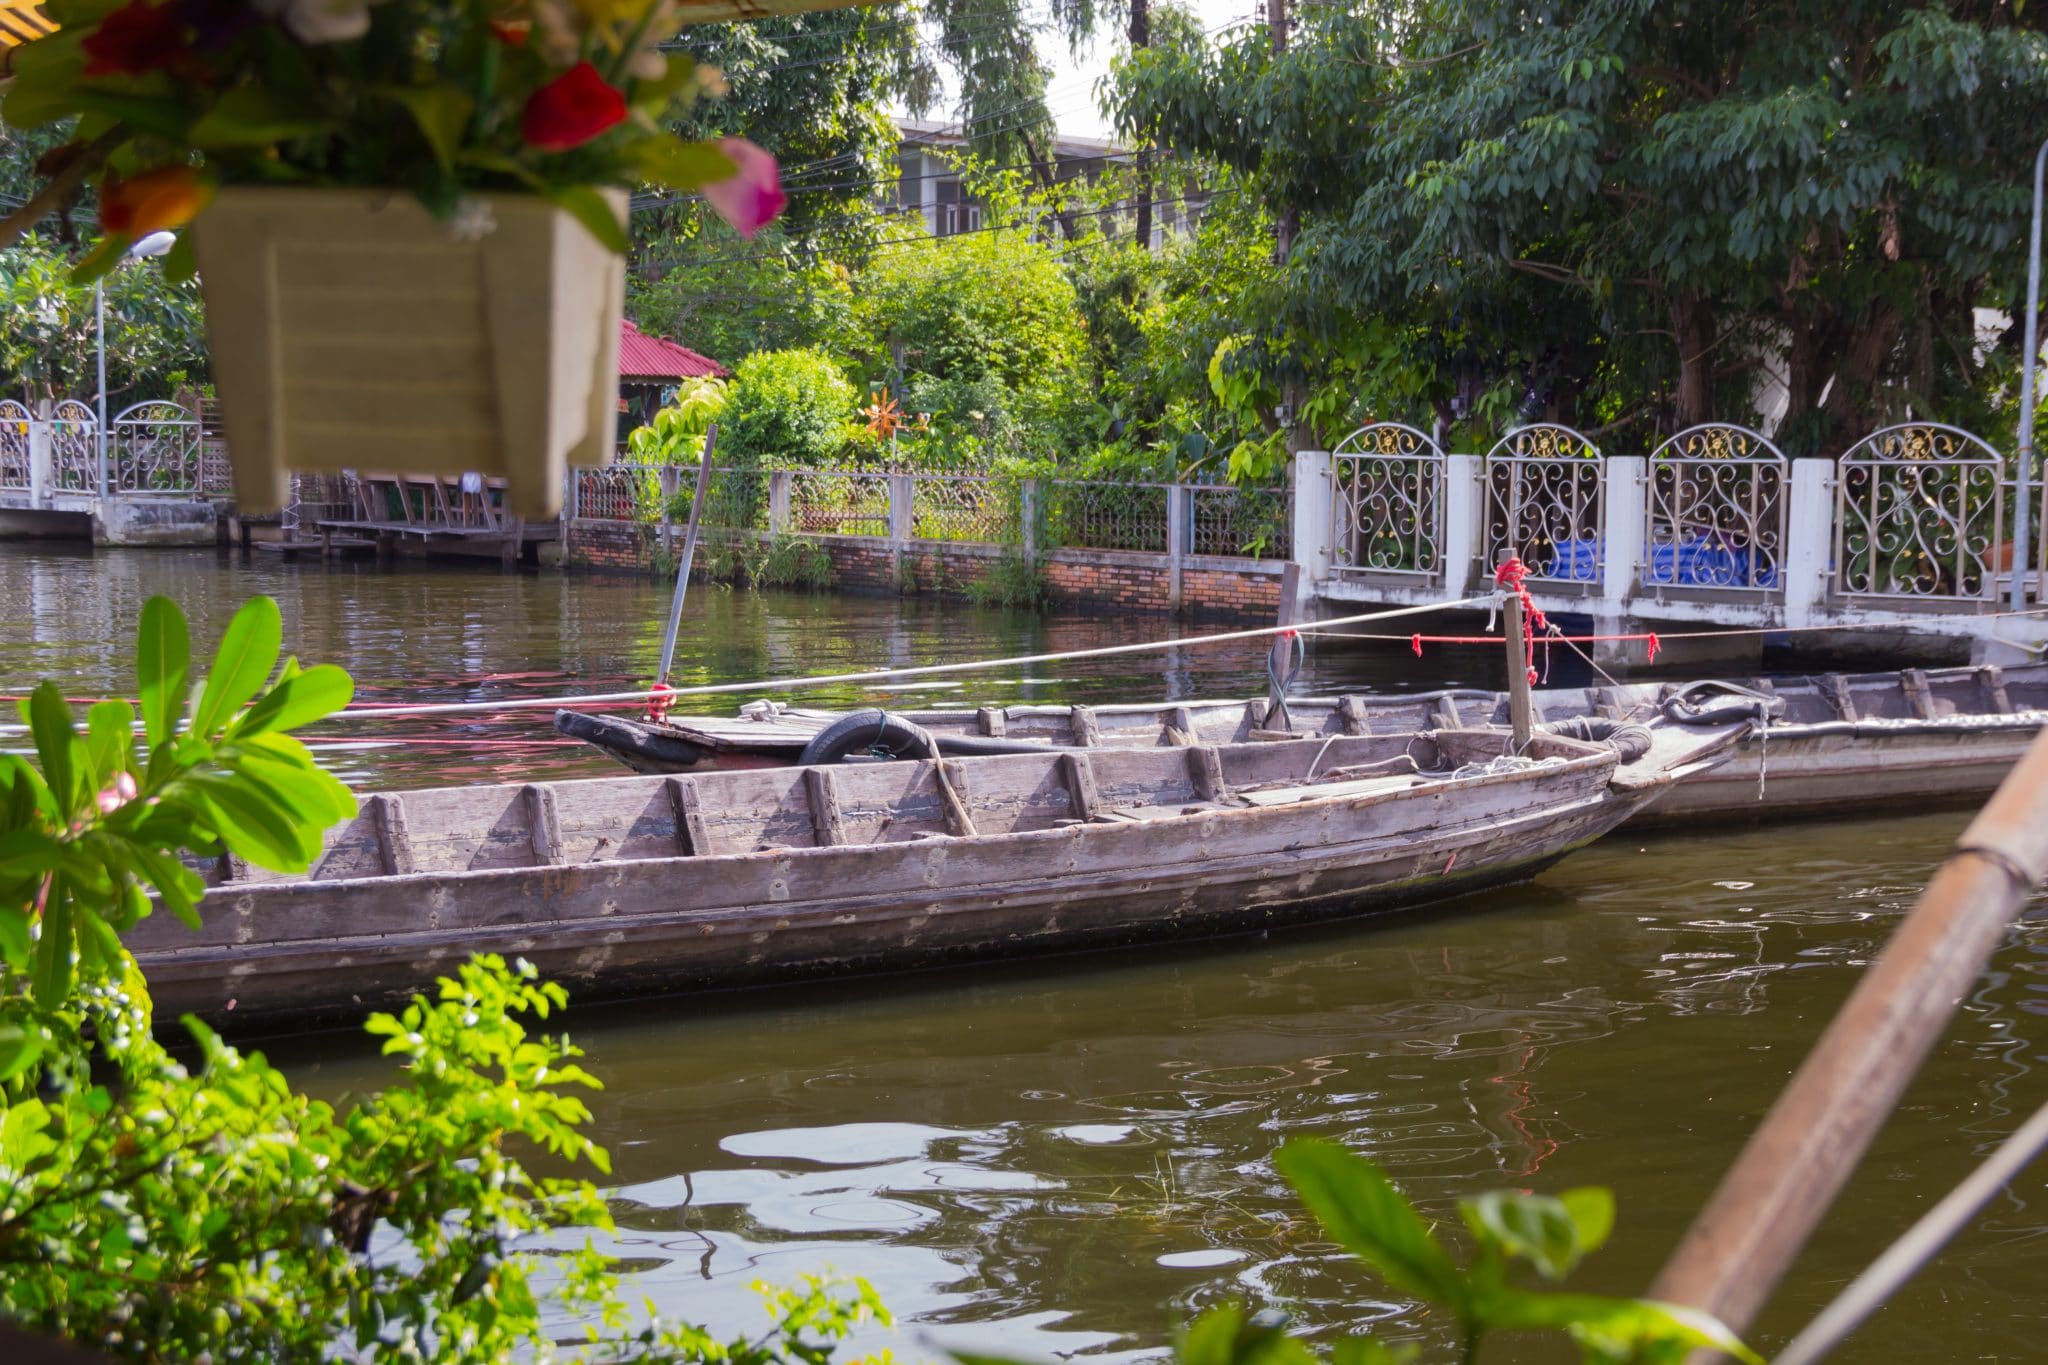 A boat on a river in Bankok, Thailand.